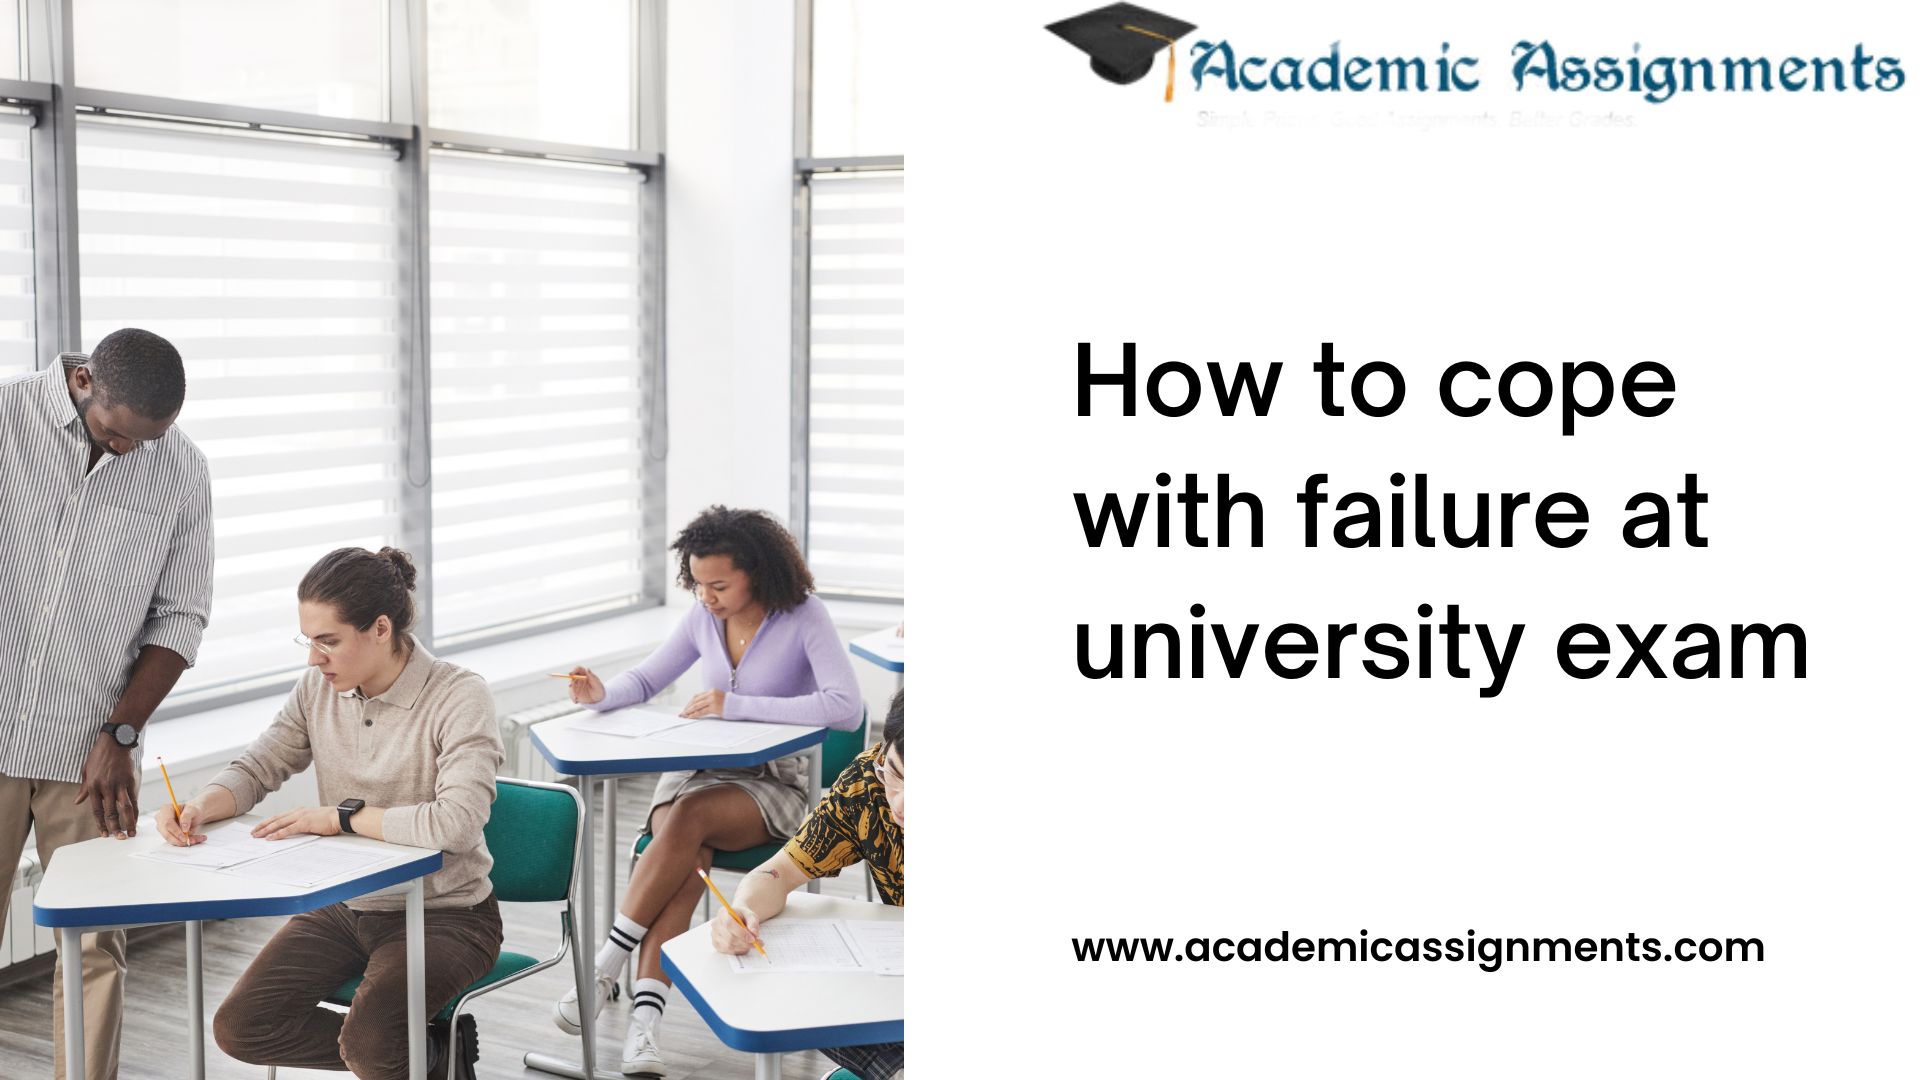 How to cope with failure at university exam